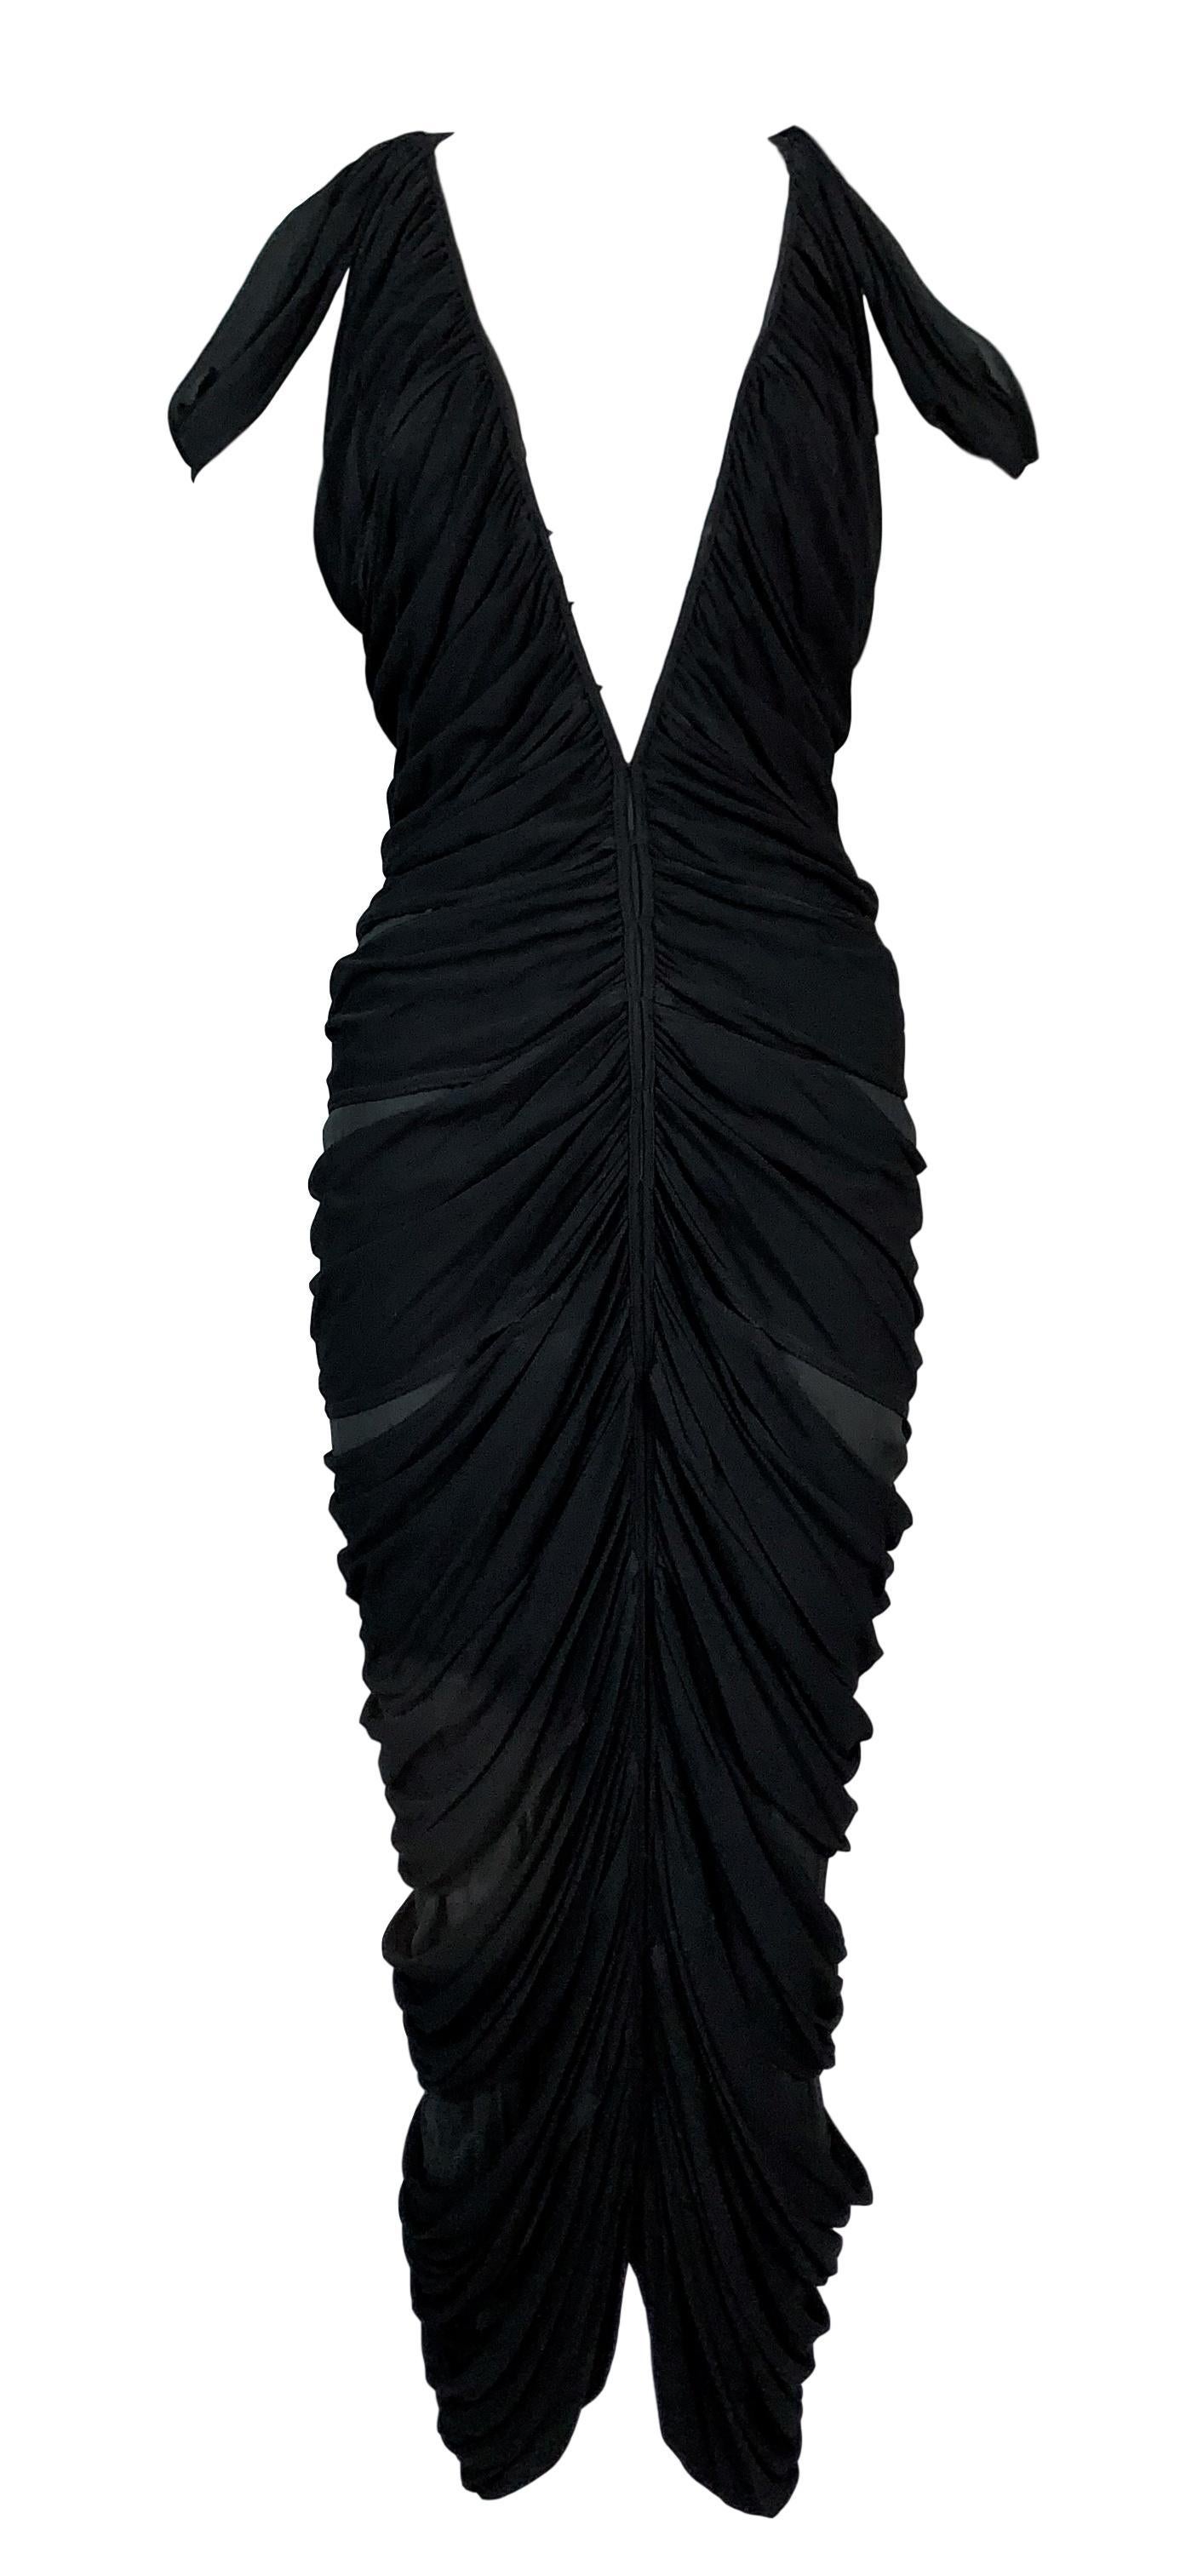 S/S 2003 Yves Saint Laurent Tom Ford Sheer Black Mummy Wrap Cut-Out Dress